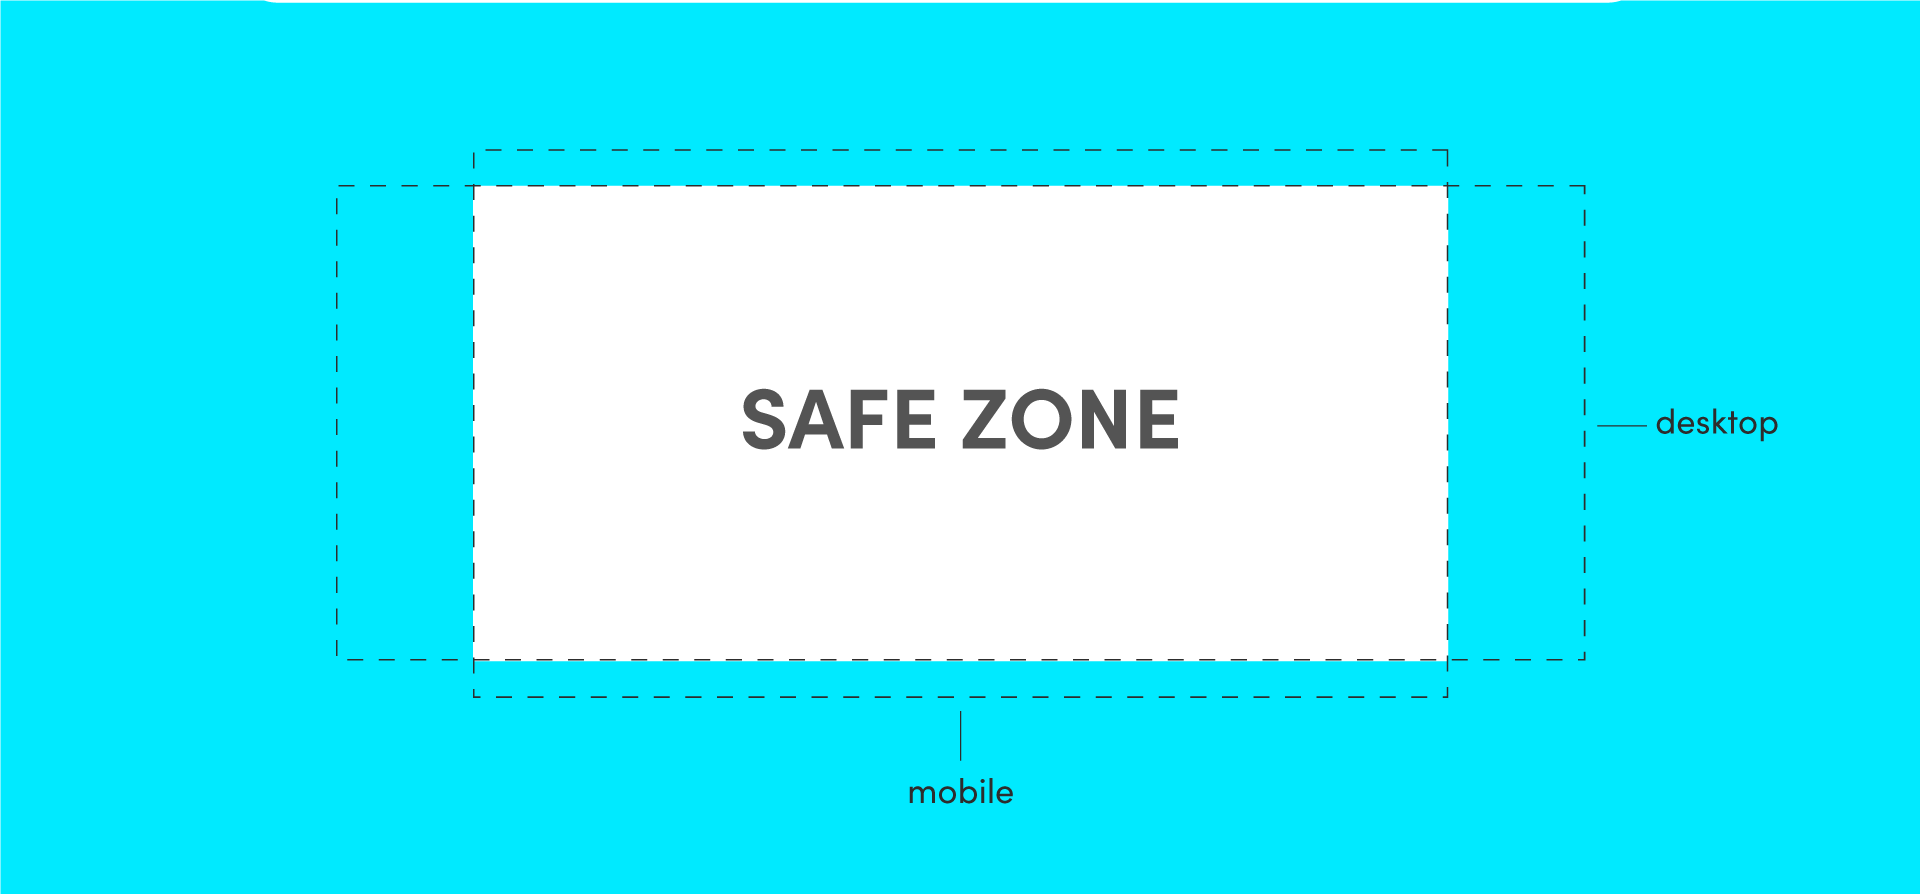 Diagram showing the safe zone relative to a desktop and mobile banner.